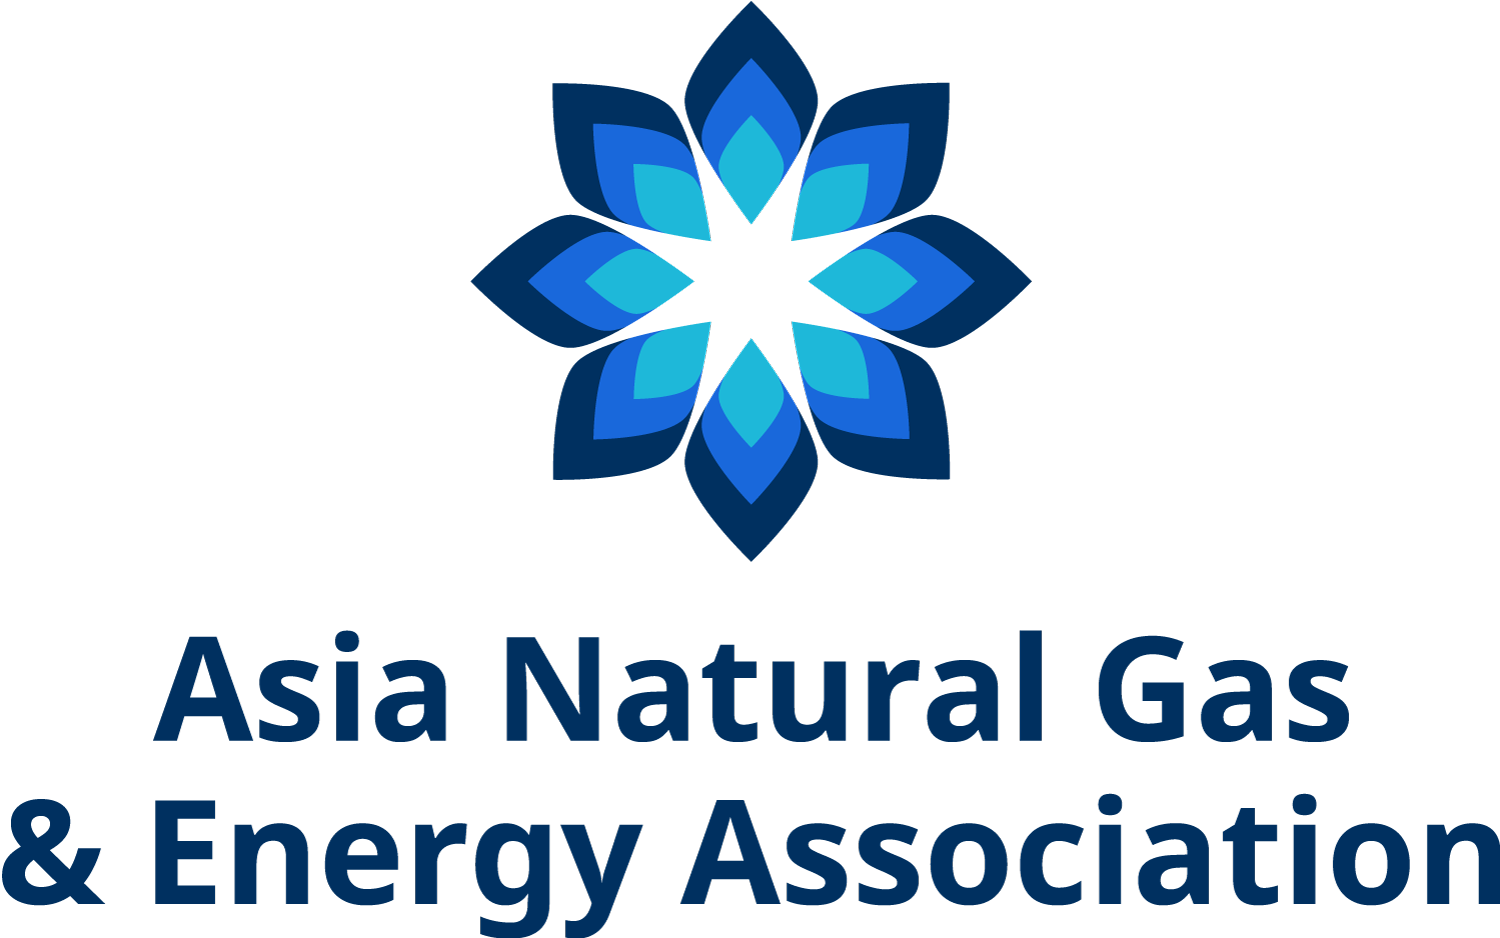 Asia Natural Gas and Energy Association